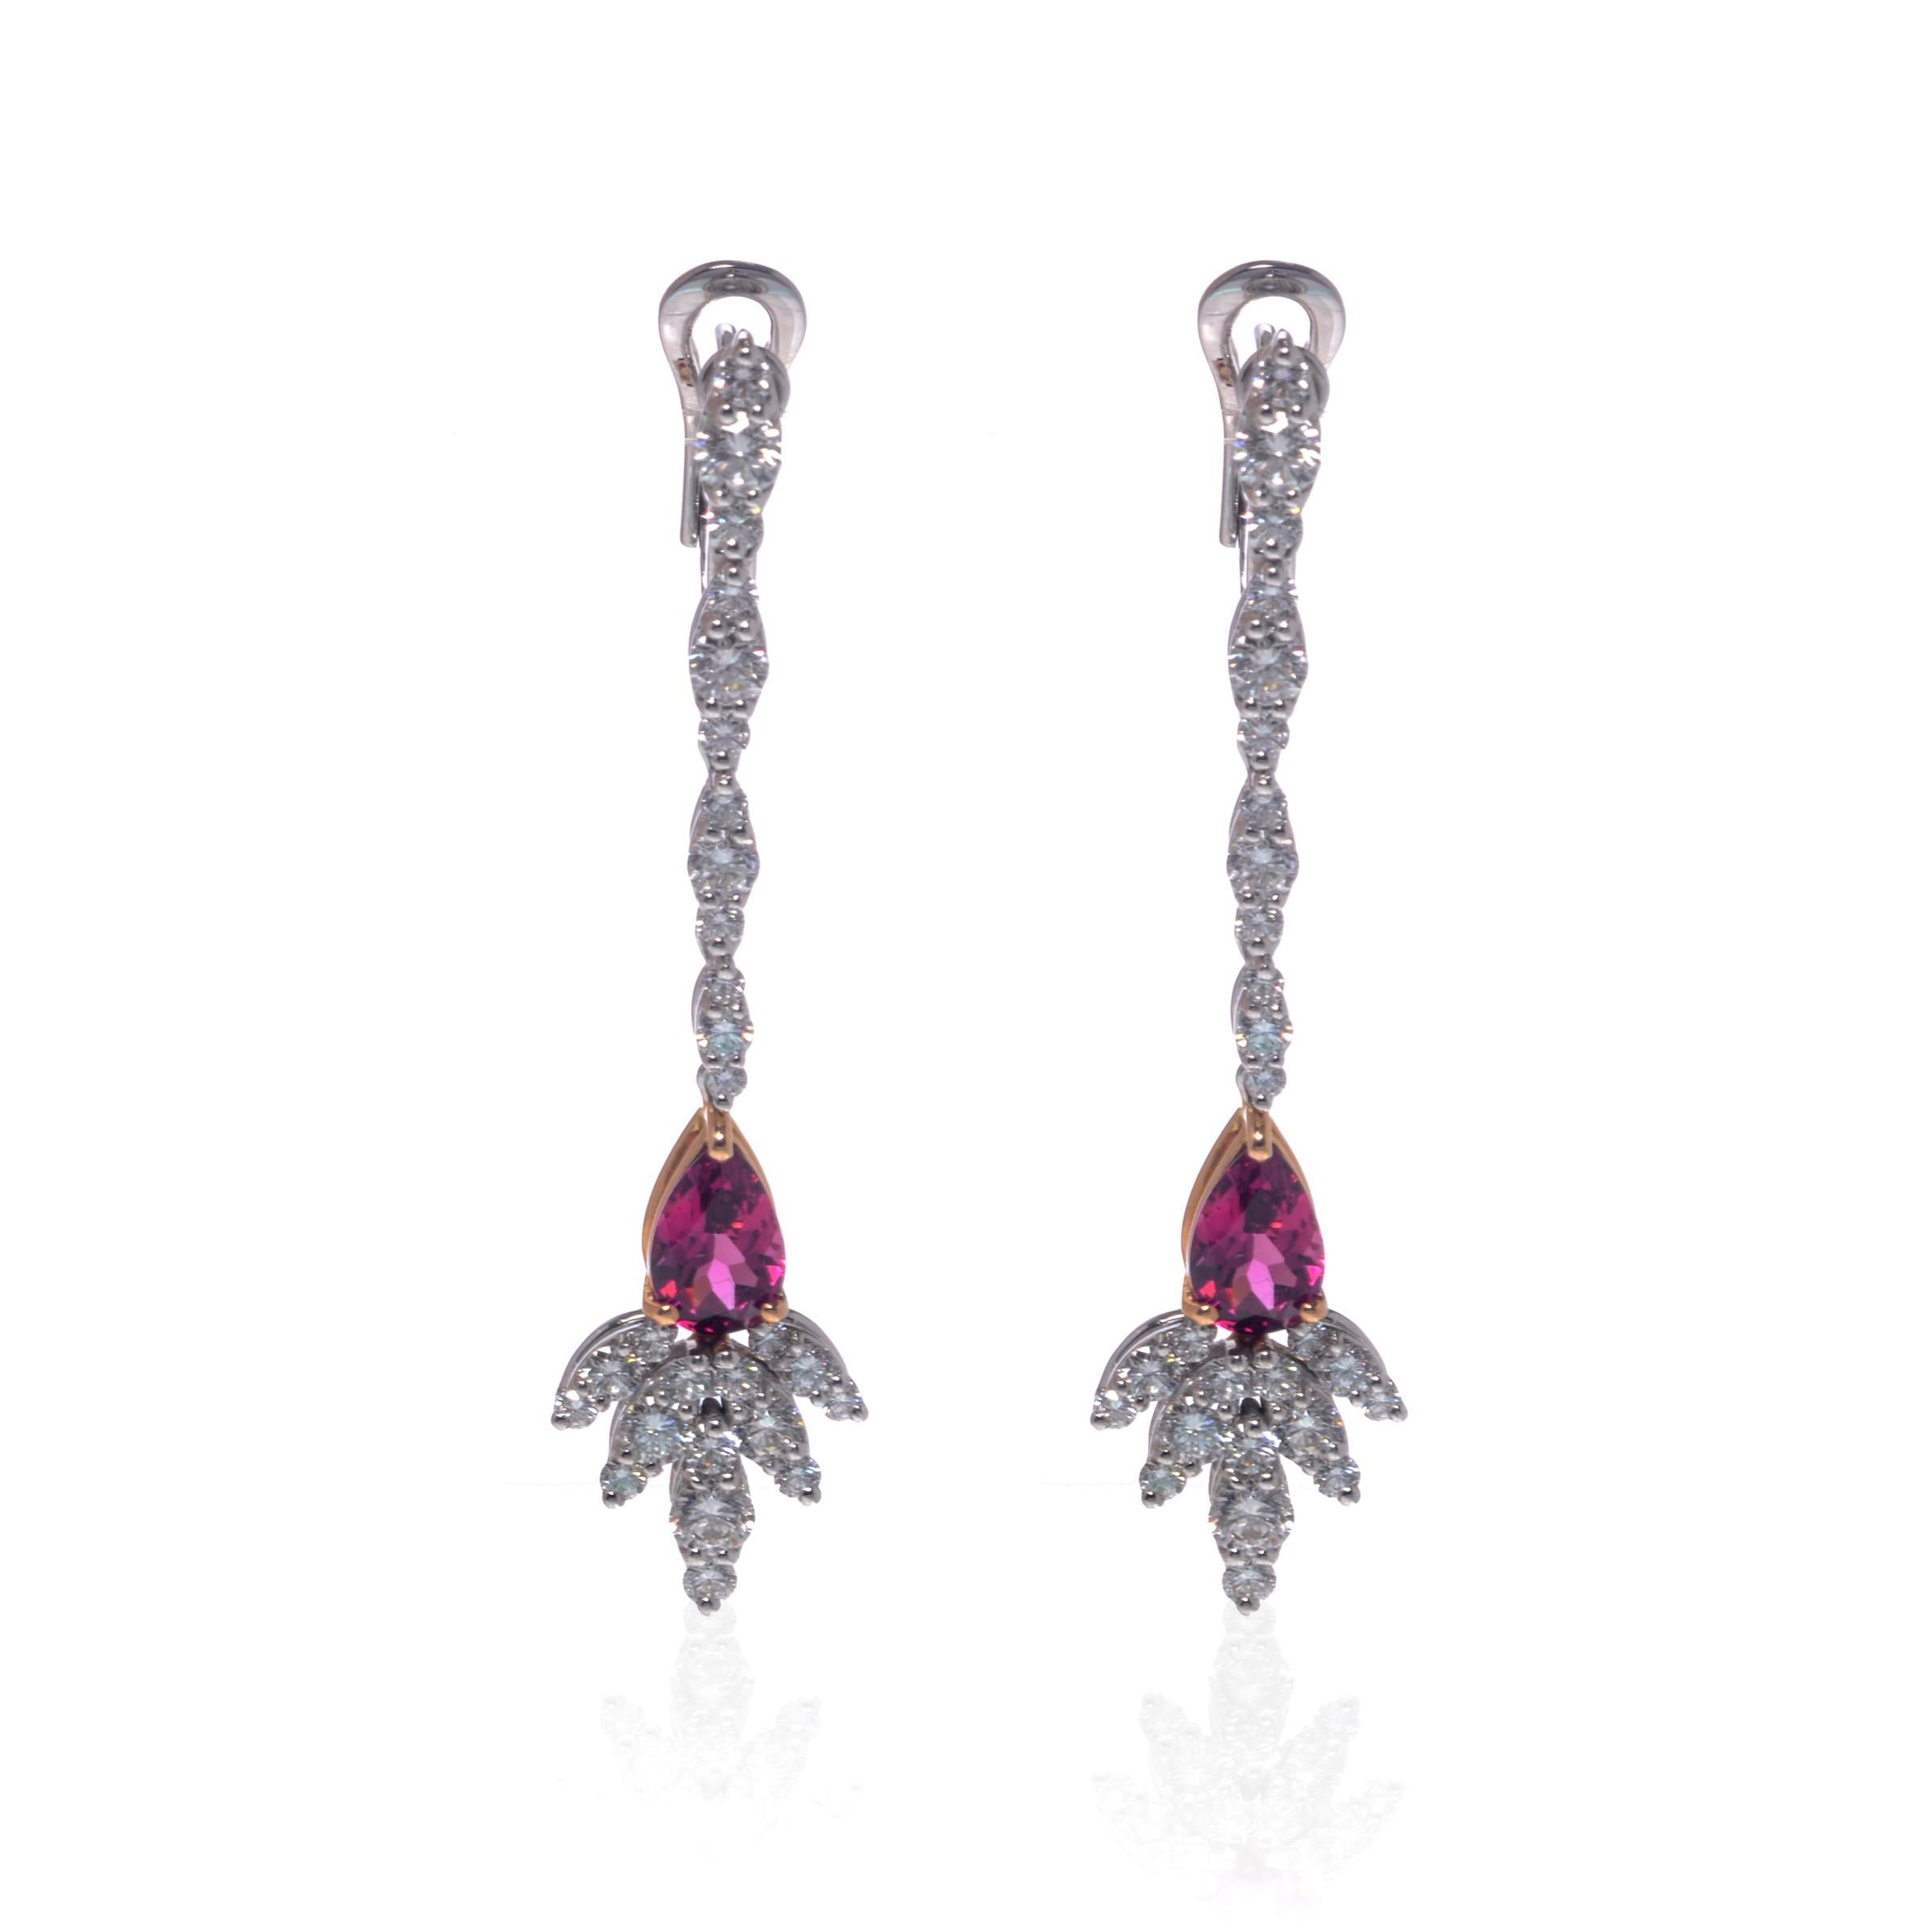 These alluring pink tourmaline and diamond drop earrings are crafted in 18k white gold. The pear-shaped pink Tourmalines are prong-set with some of glimmering round cut diamonds. Total weight of Tourmaline, 1.95cts. Total diamond weigh: 2.72cts.